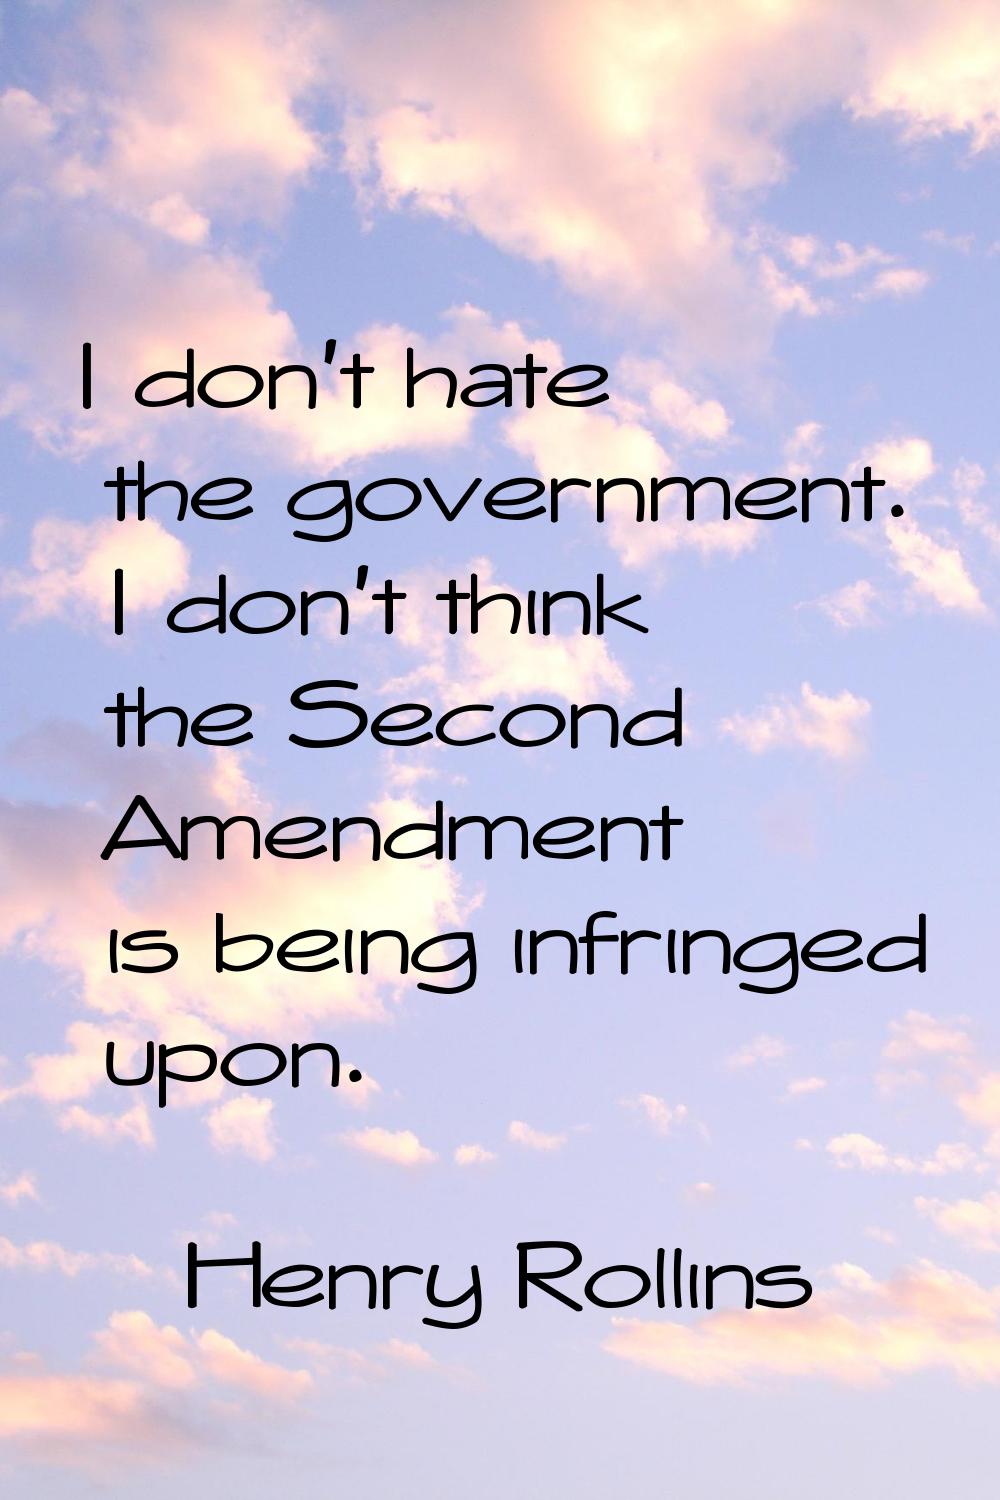 I don't hate the government. I don't think the Second Amendment is being infringed upon.